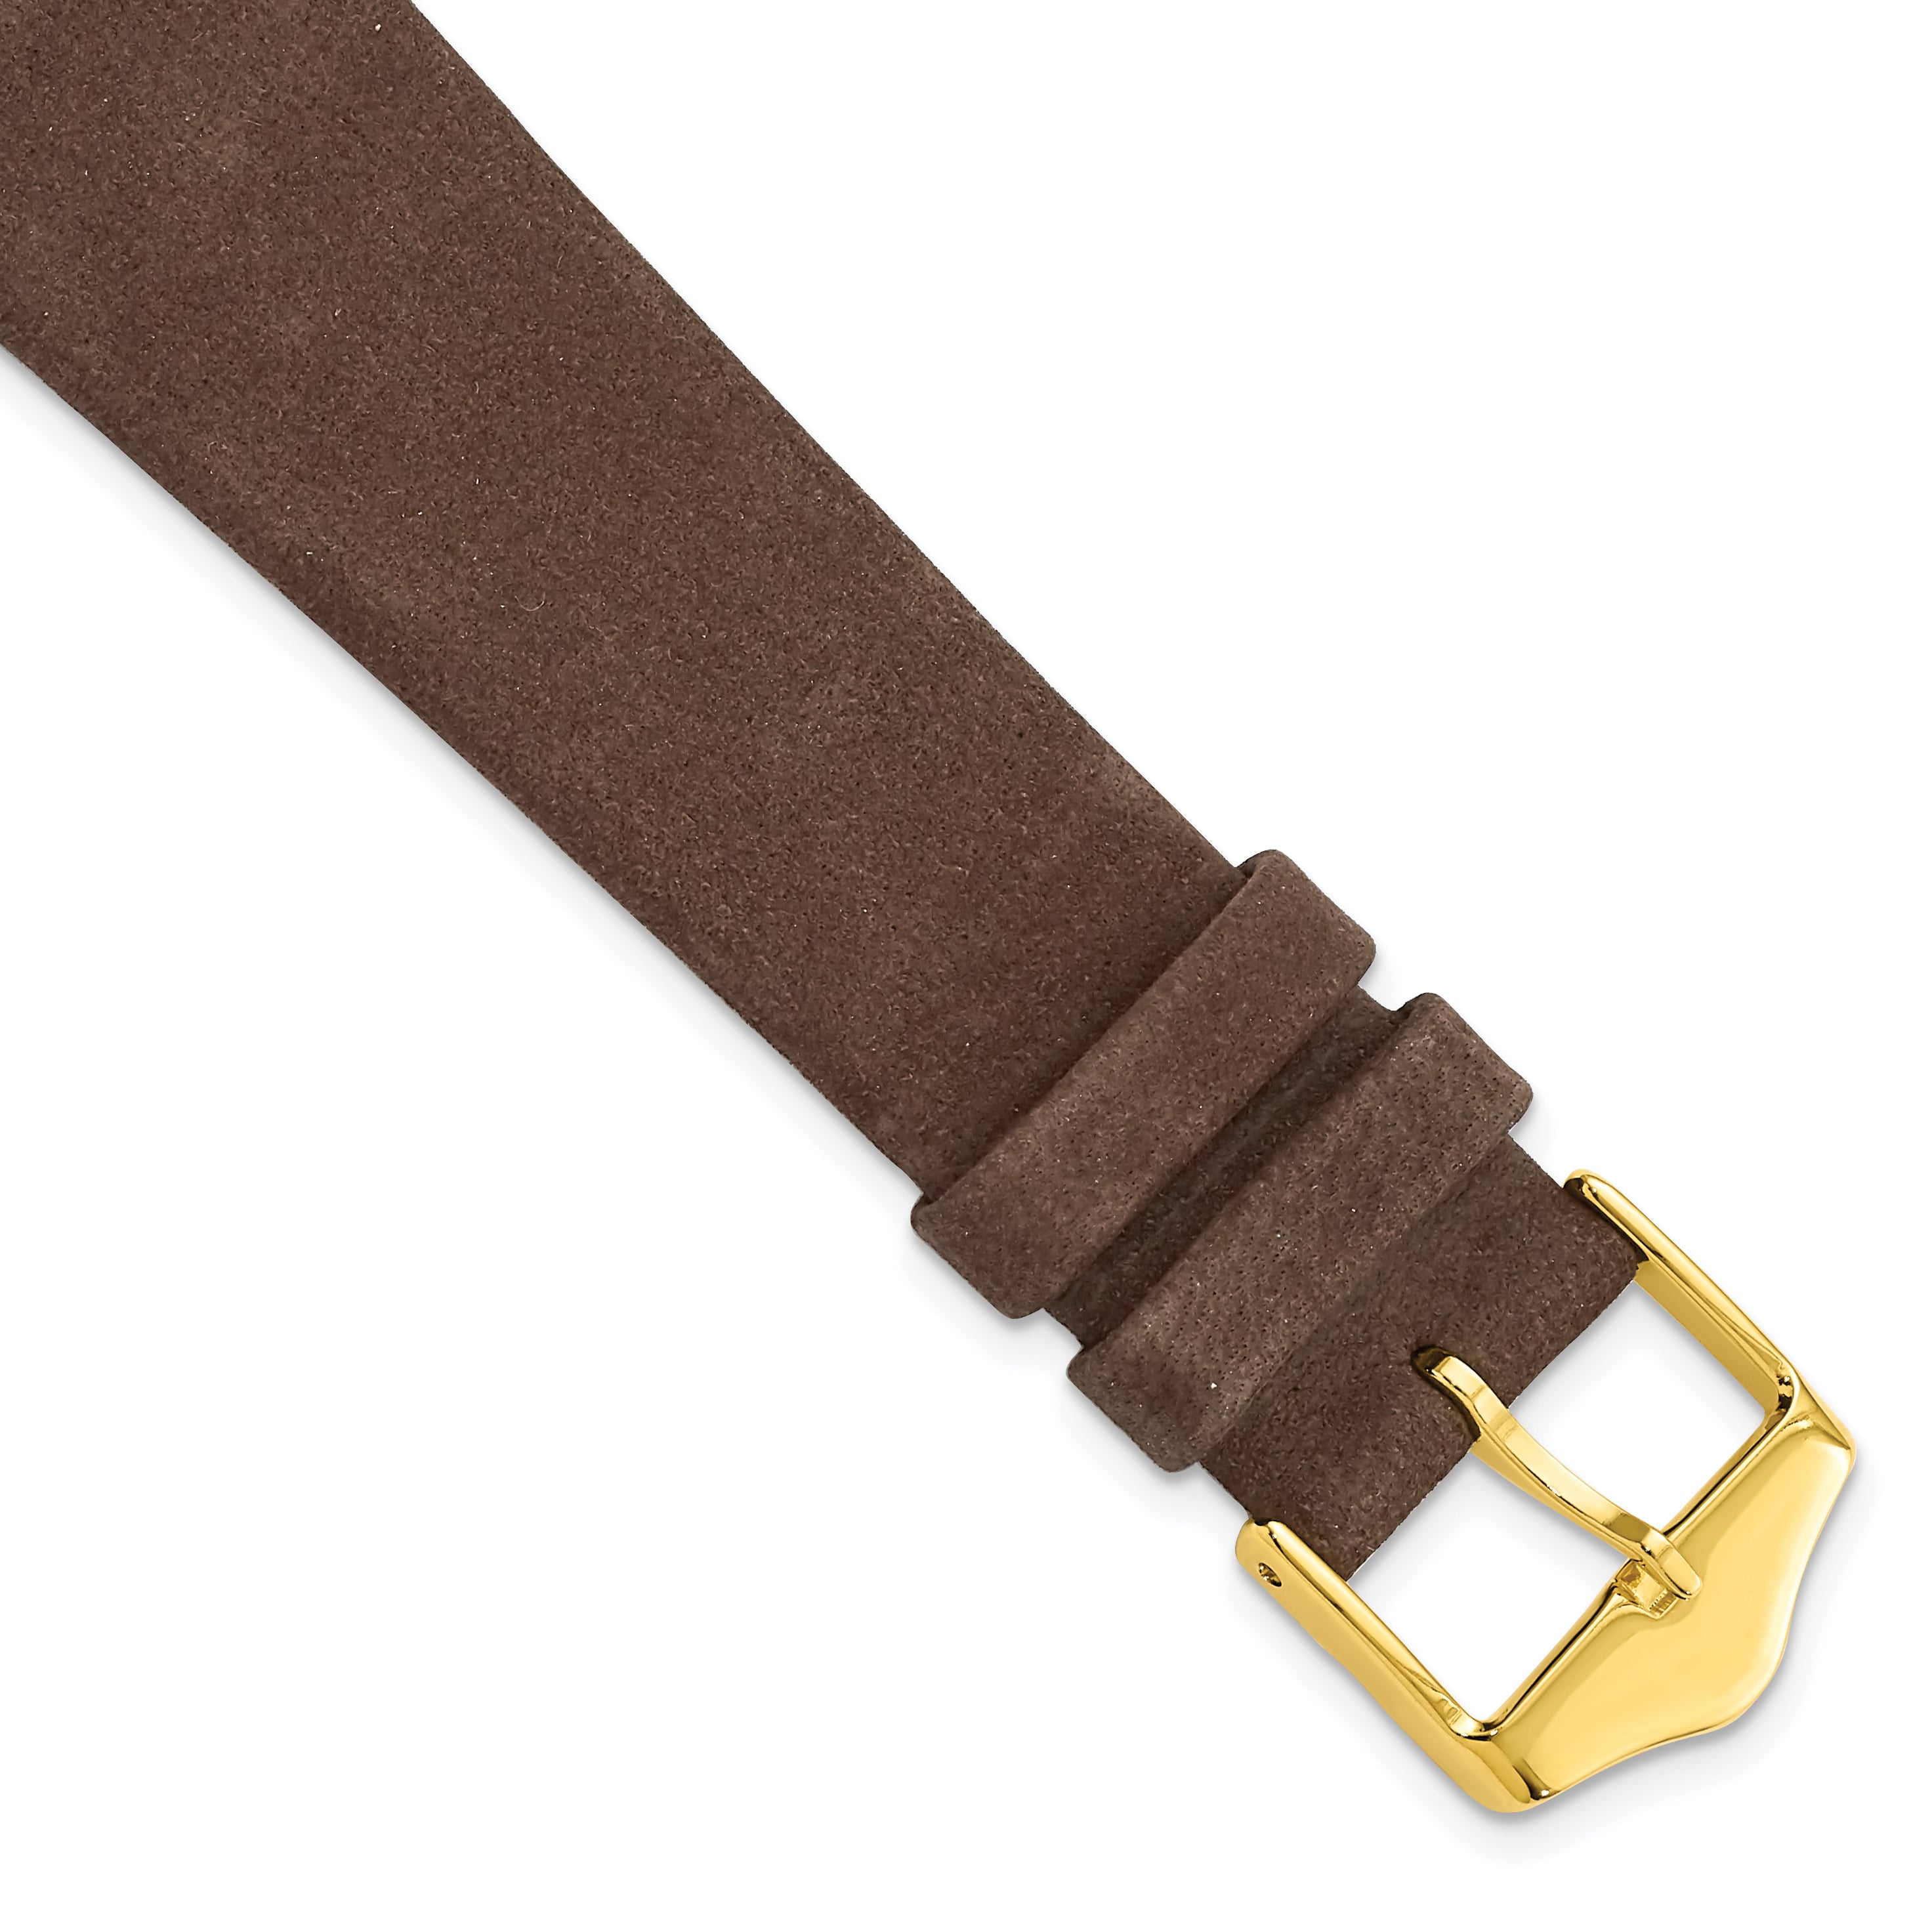 DeBeer 20mm Dark Brown Suede Flat Leather with Gold-tone Buckle 7.75 inch Watch Band